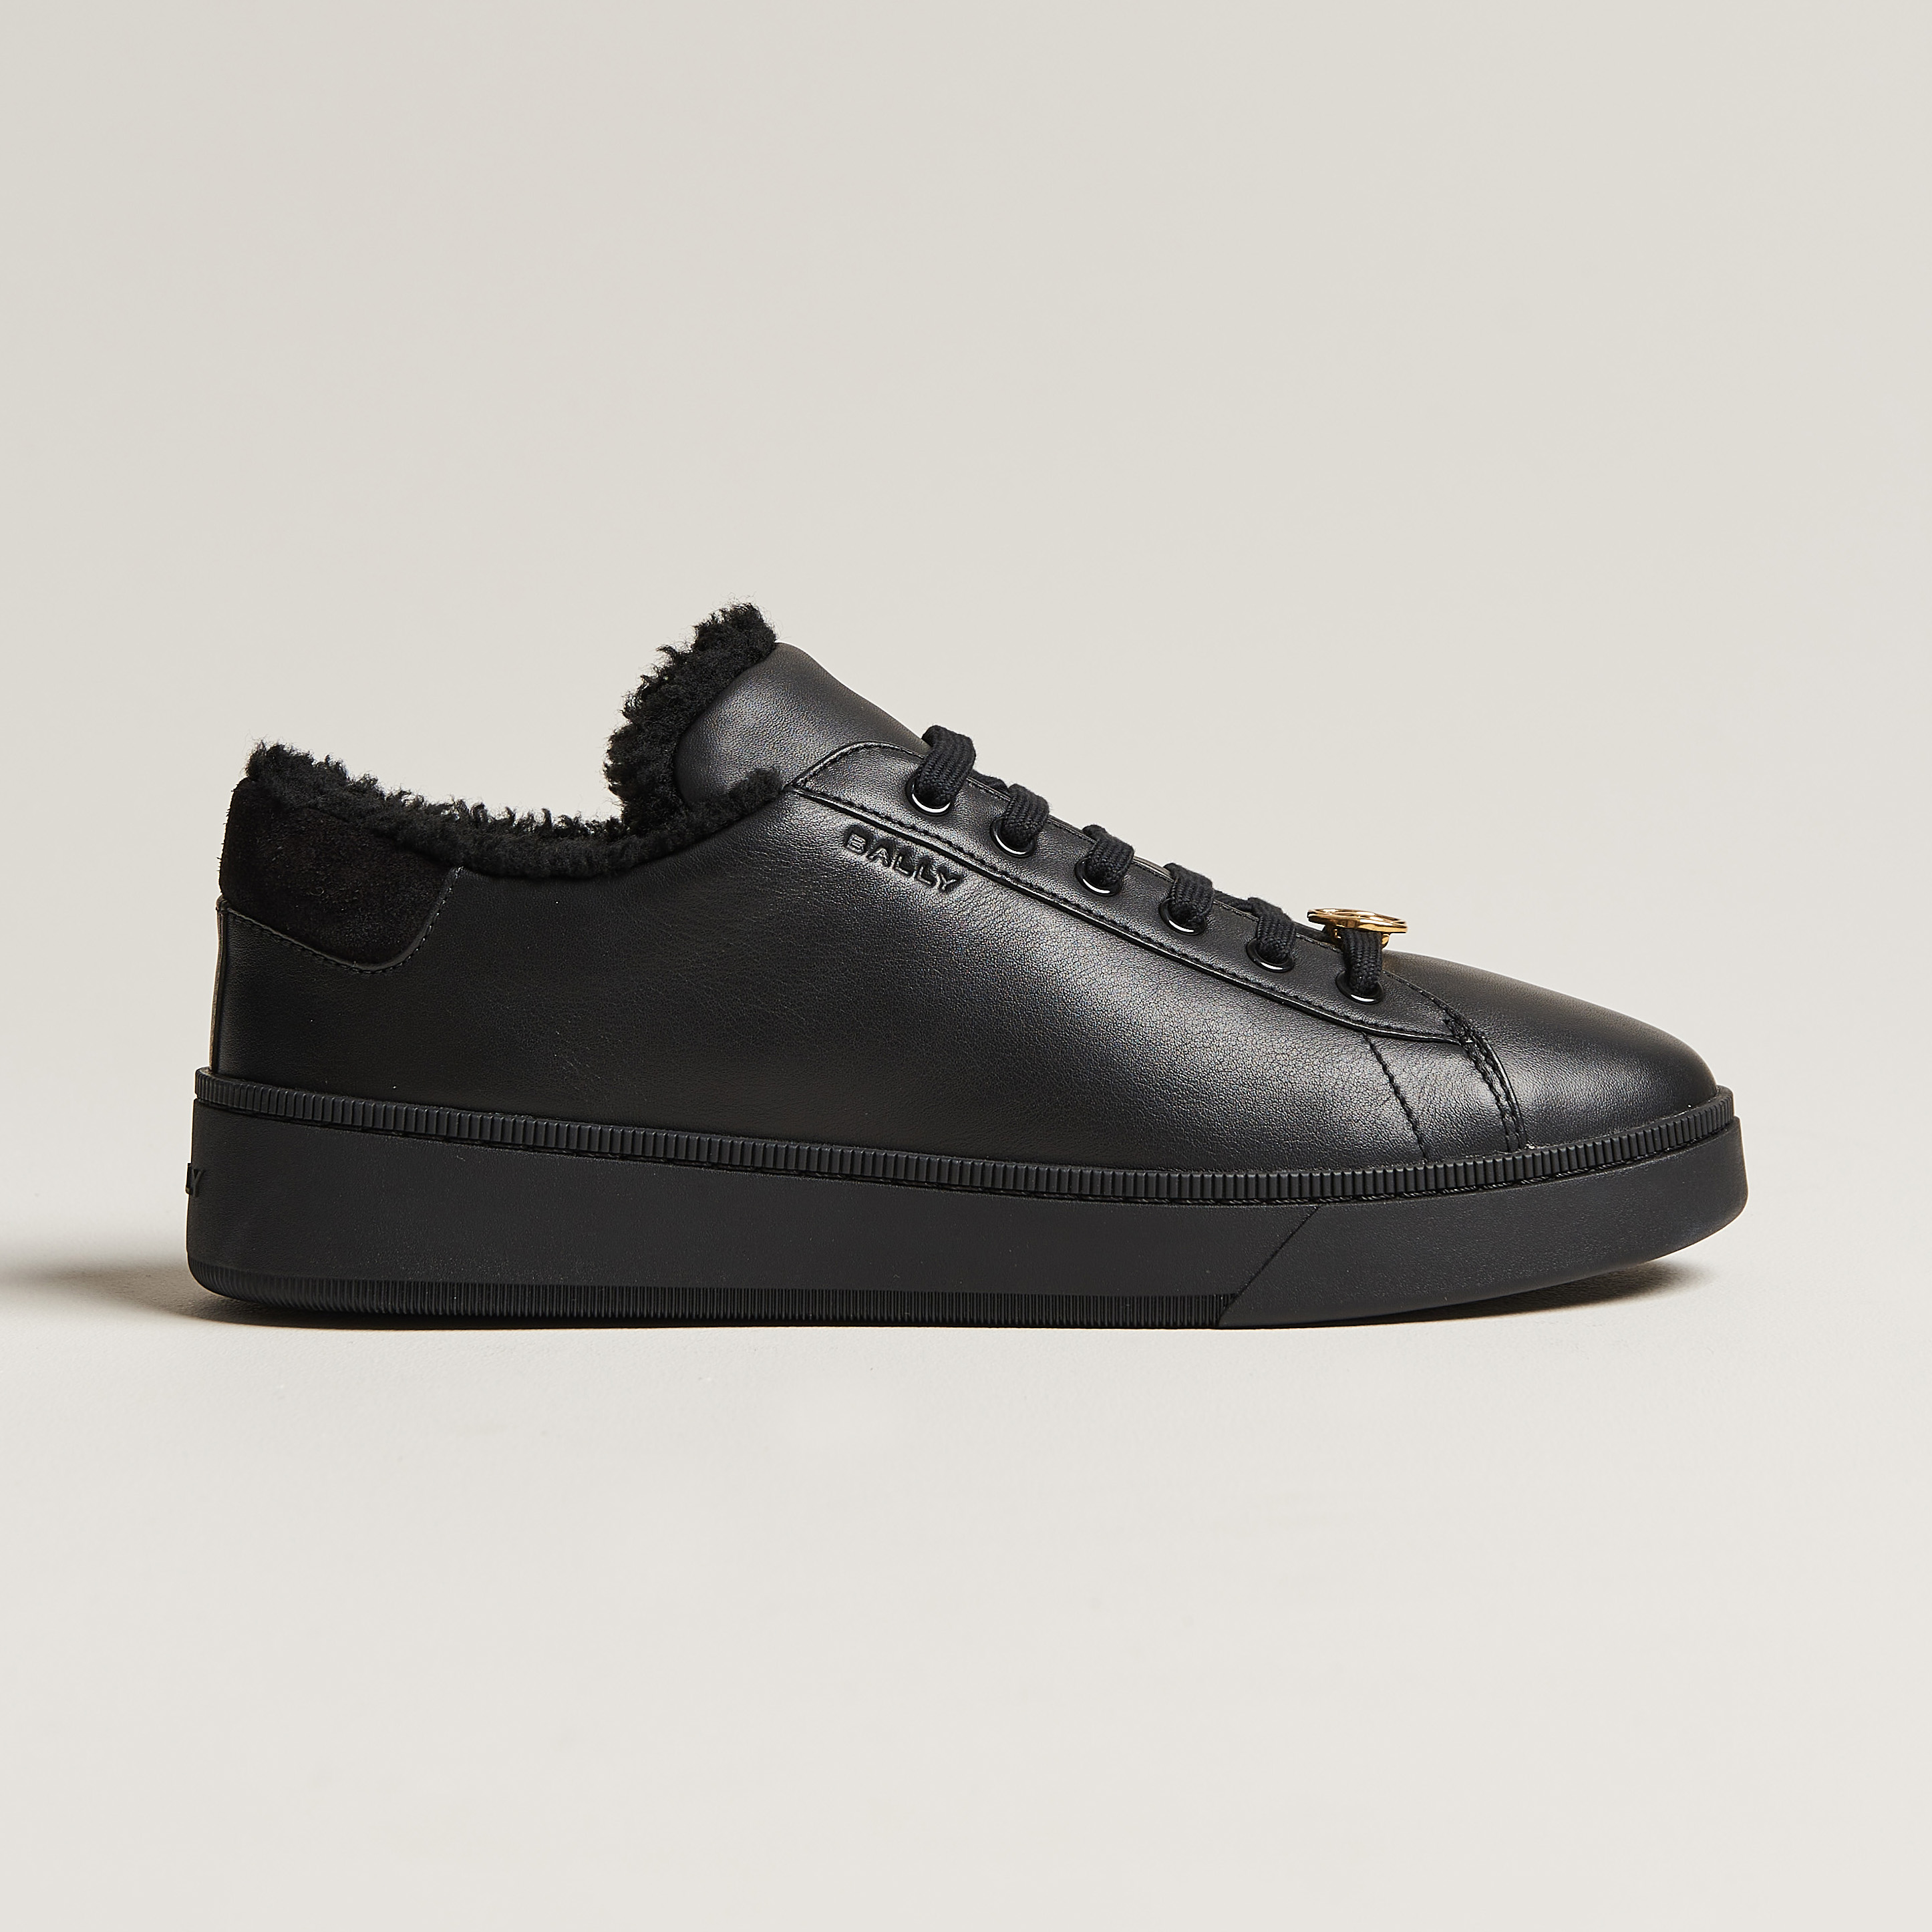 Bally Ryver Leather Shearling Sneaker Black at CareOfCarl.com